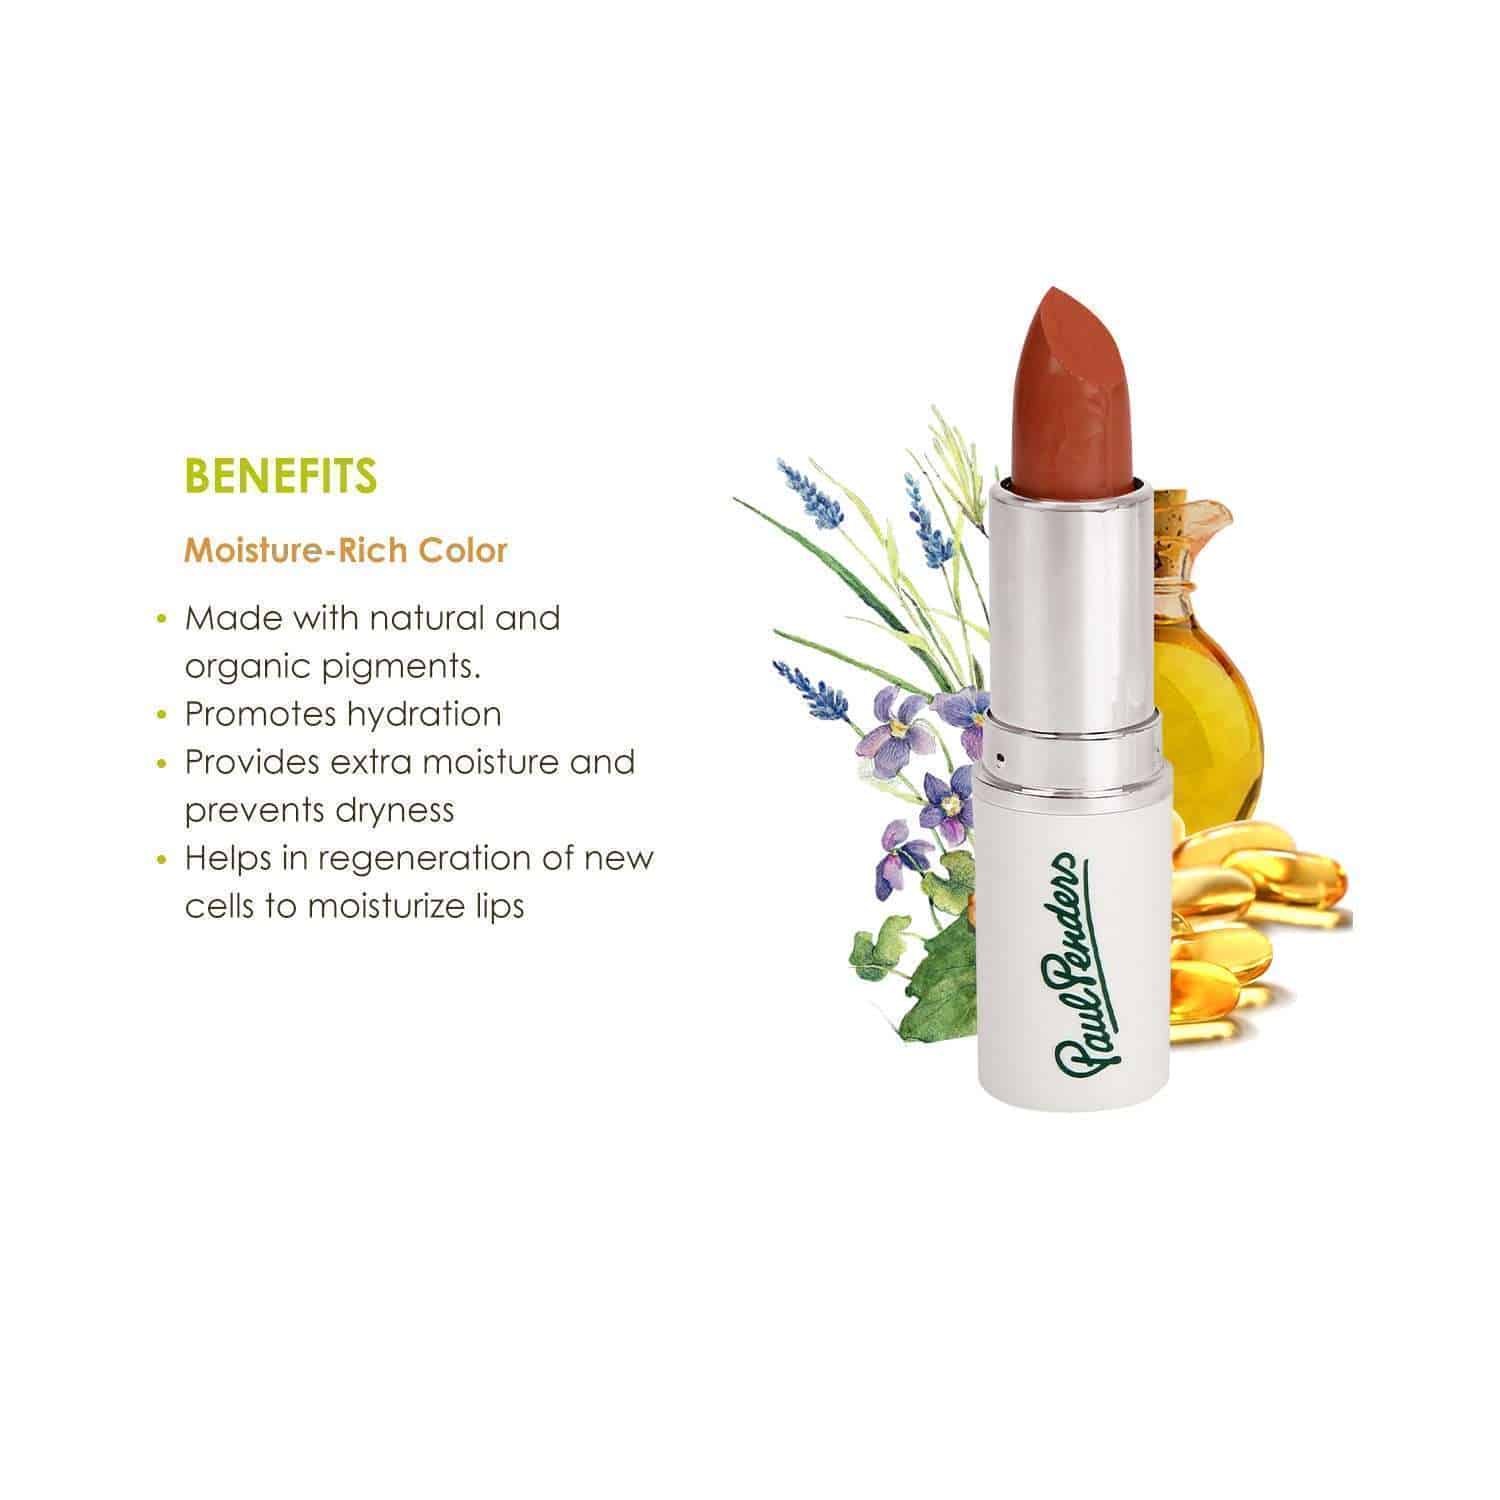 Paul Penders Hand Made Natural Cream Lipstick For A Natural Look | Moisture Rich Colour – Raspberry 4g